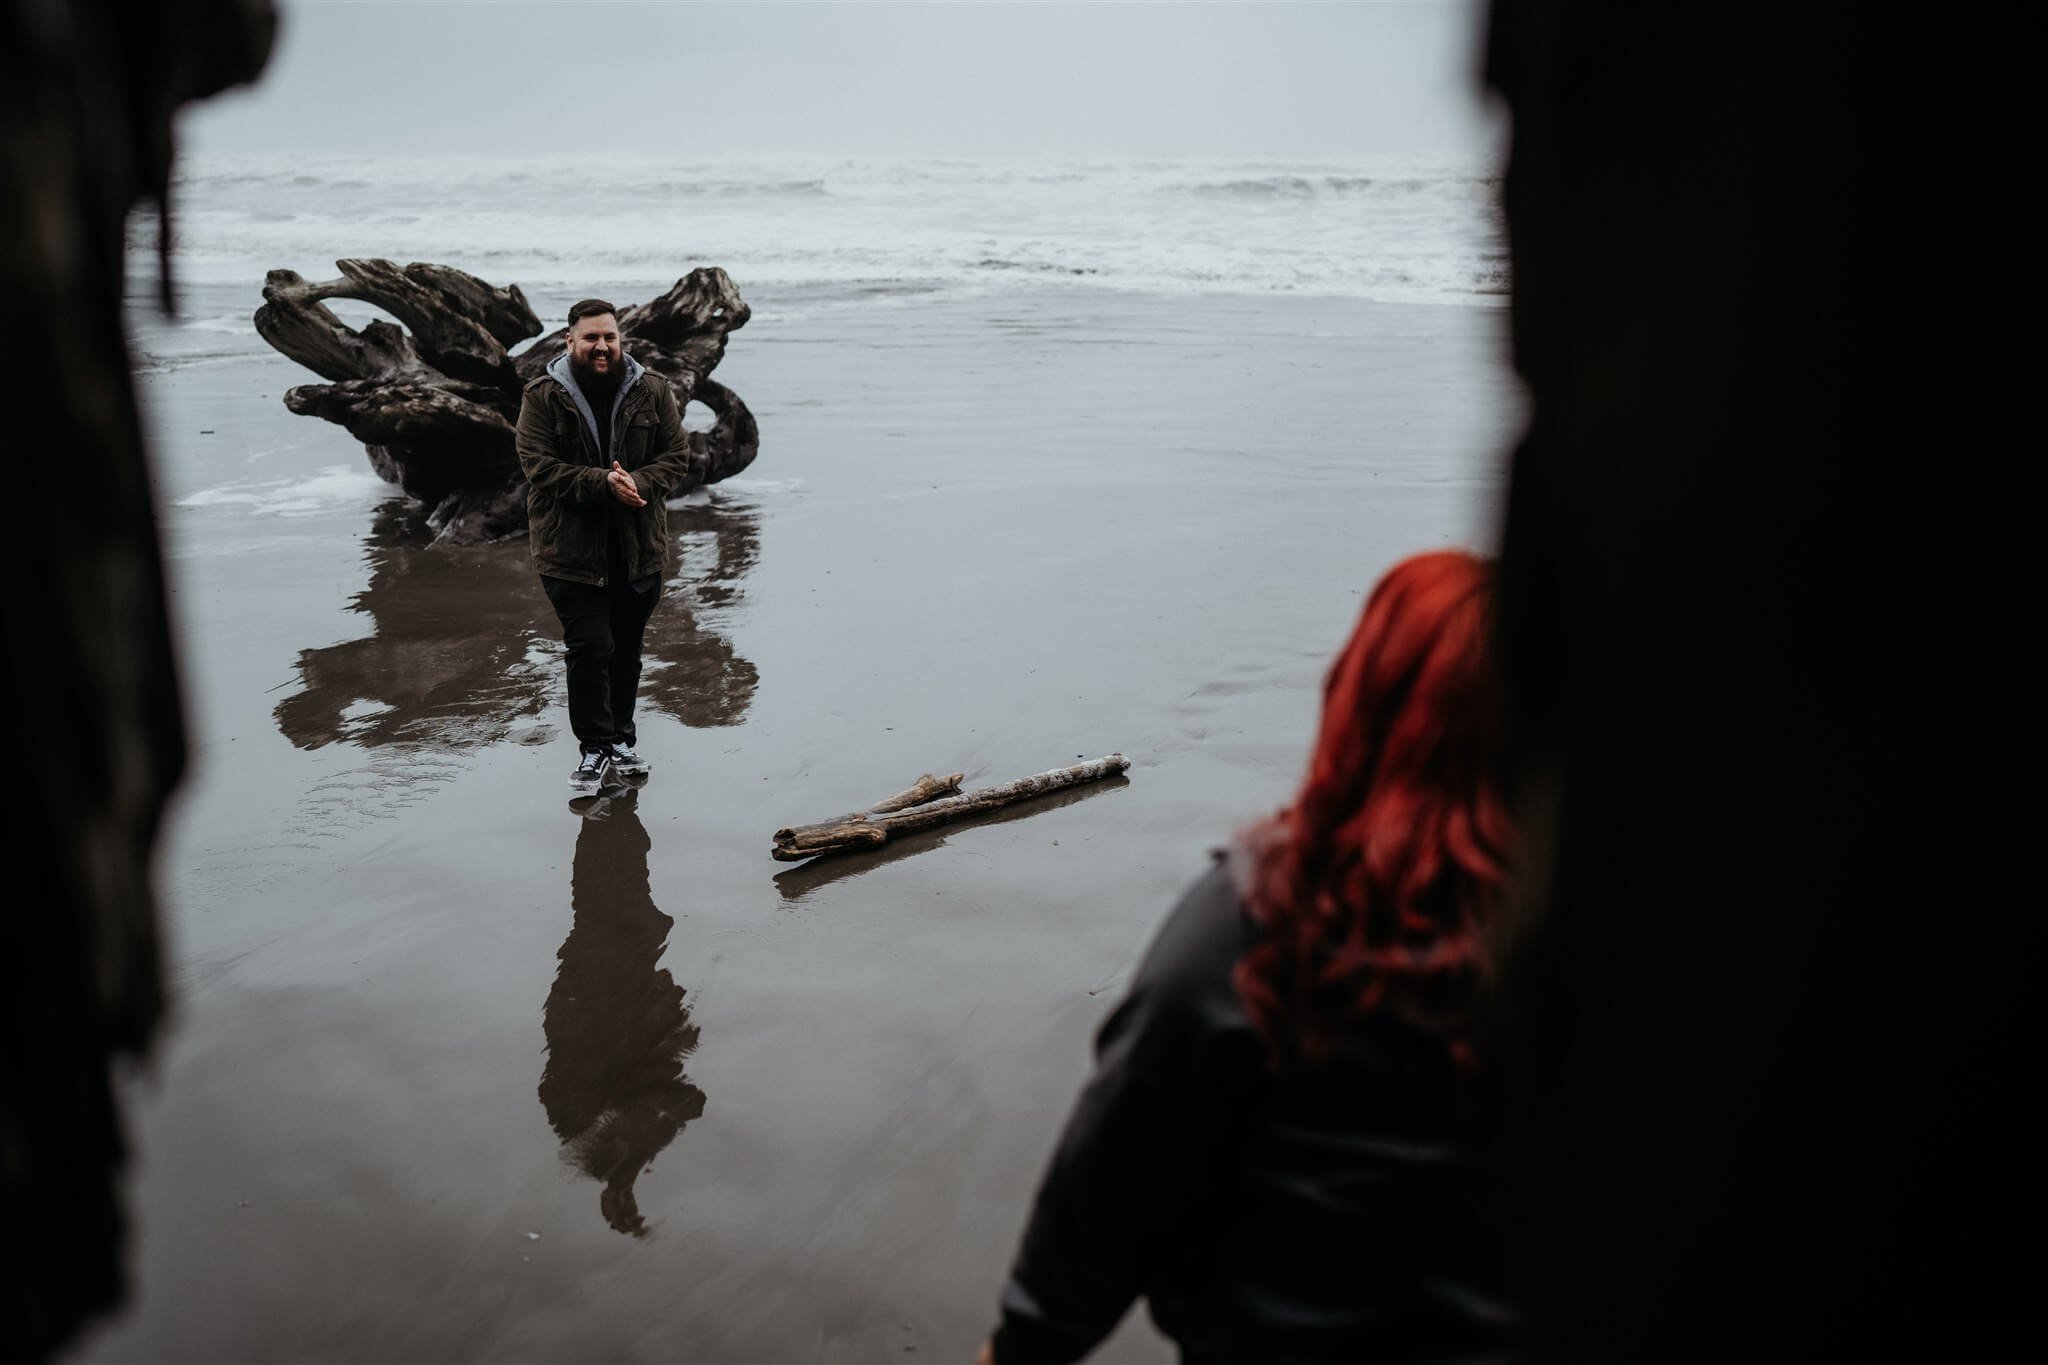 Couple photos at Ruby Beach in Olympic National Park